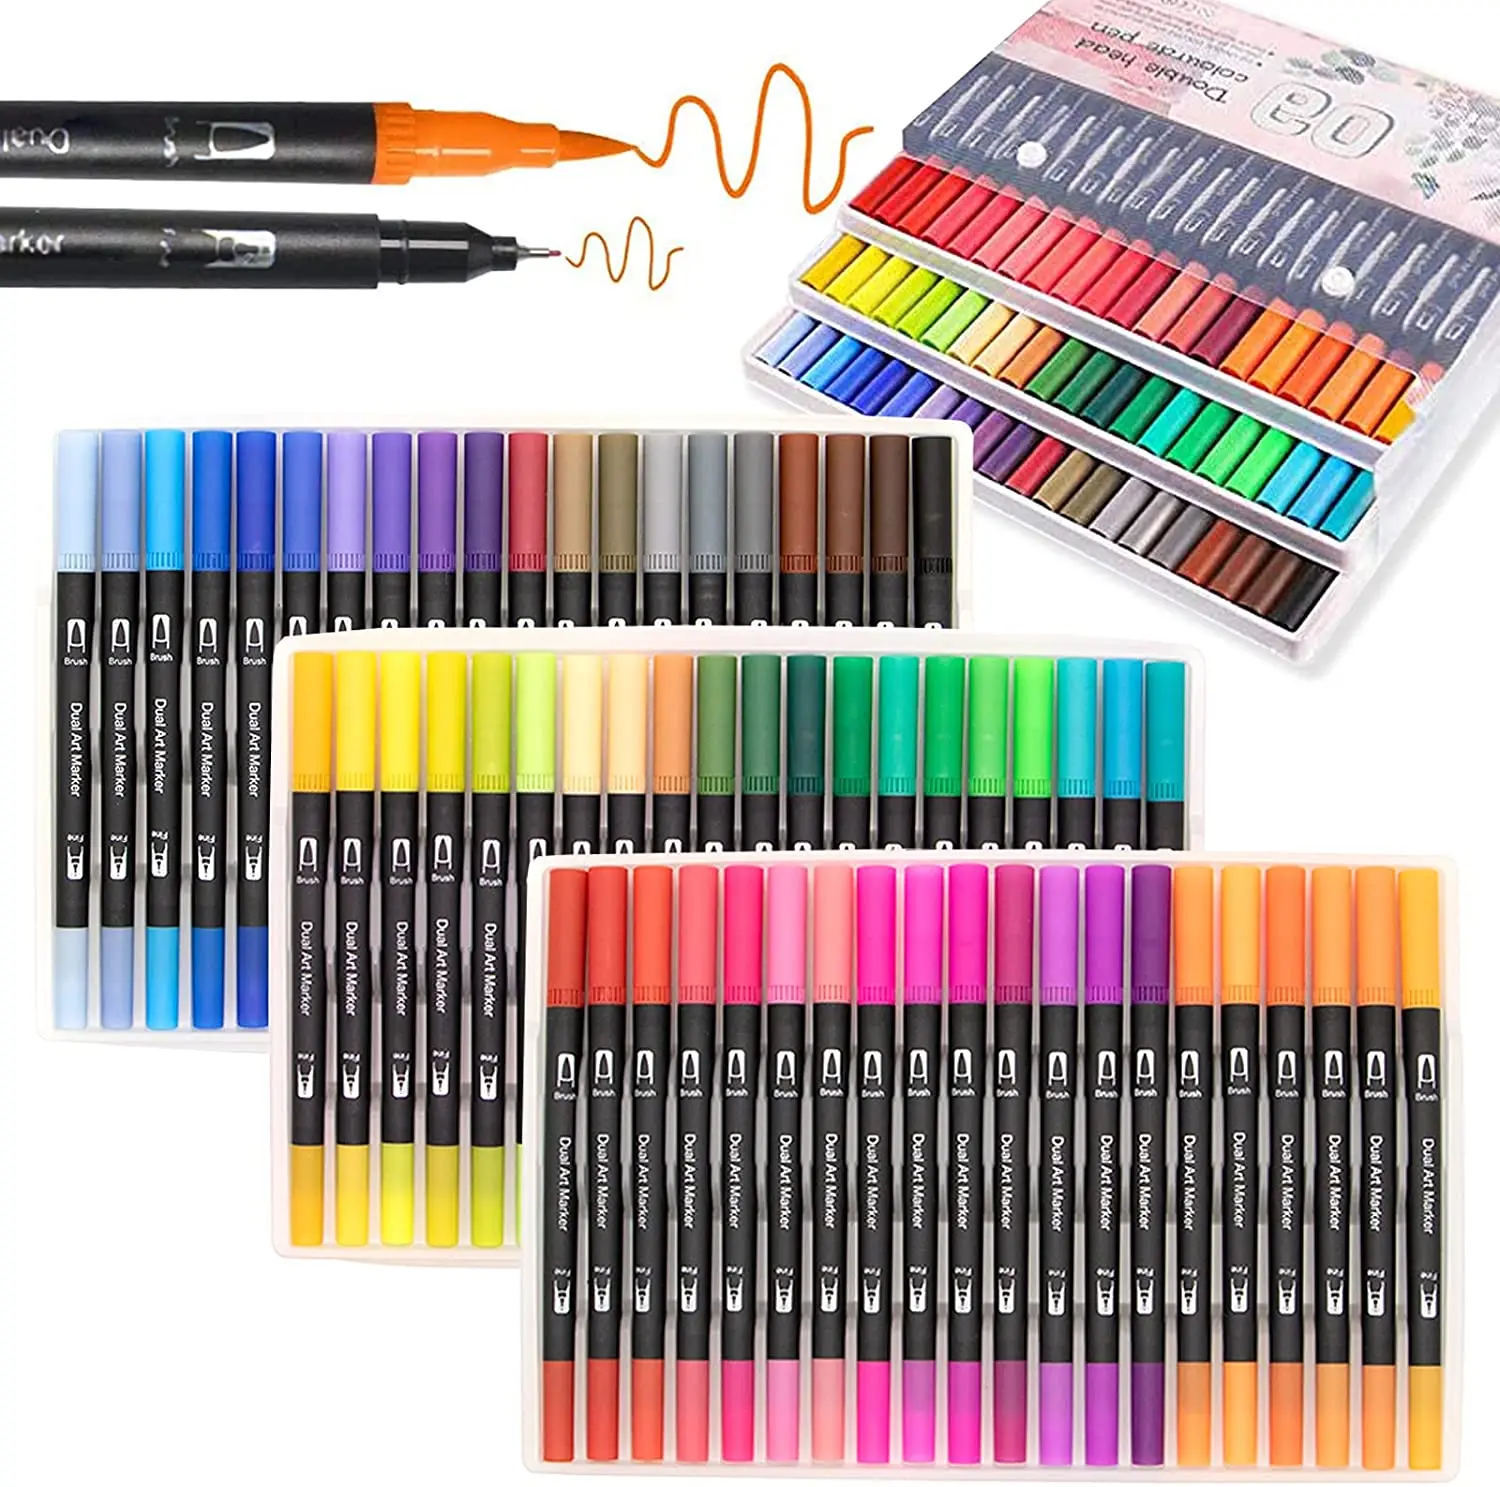 60 Color Dual Tips Brush Pens Art Markers,Artist Fine and Brush Tip Colored Pens, for Calligraphy Drawing Sketching Kids Adult